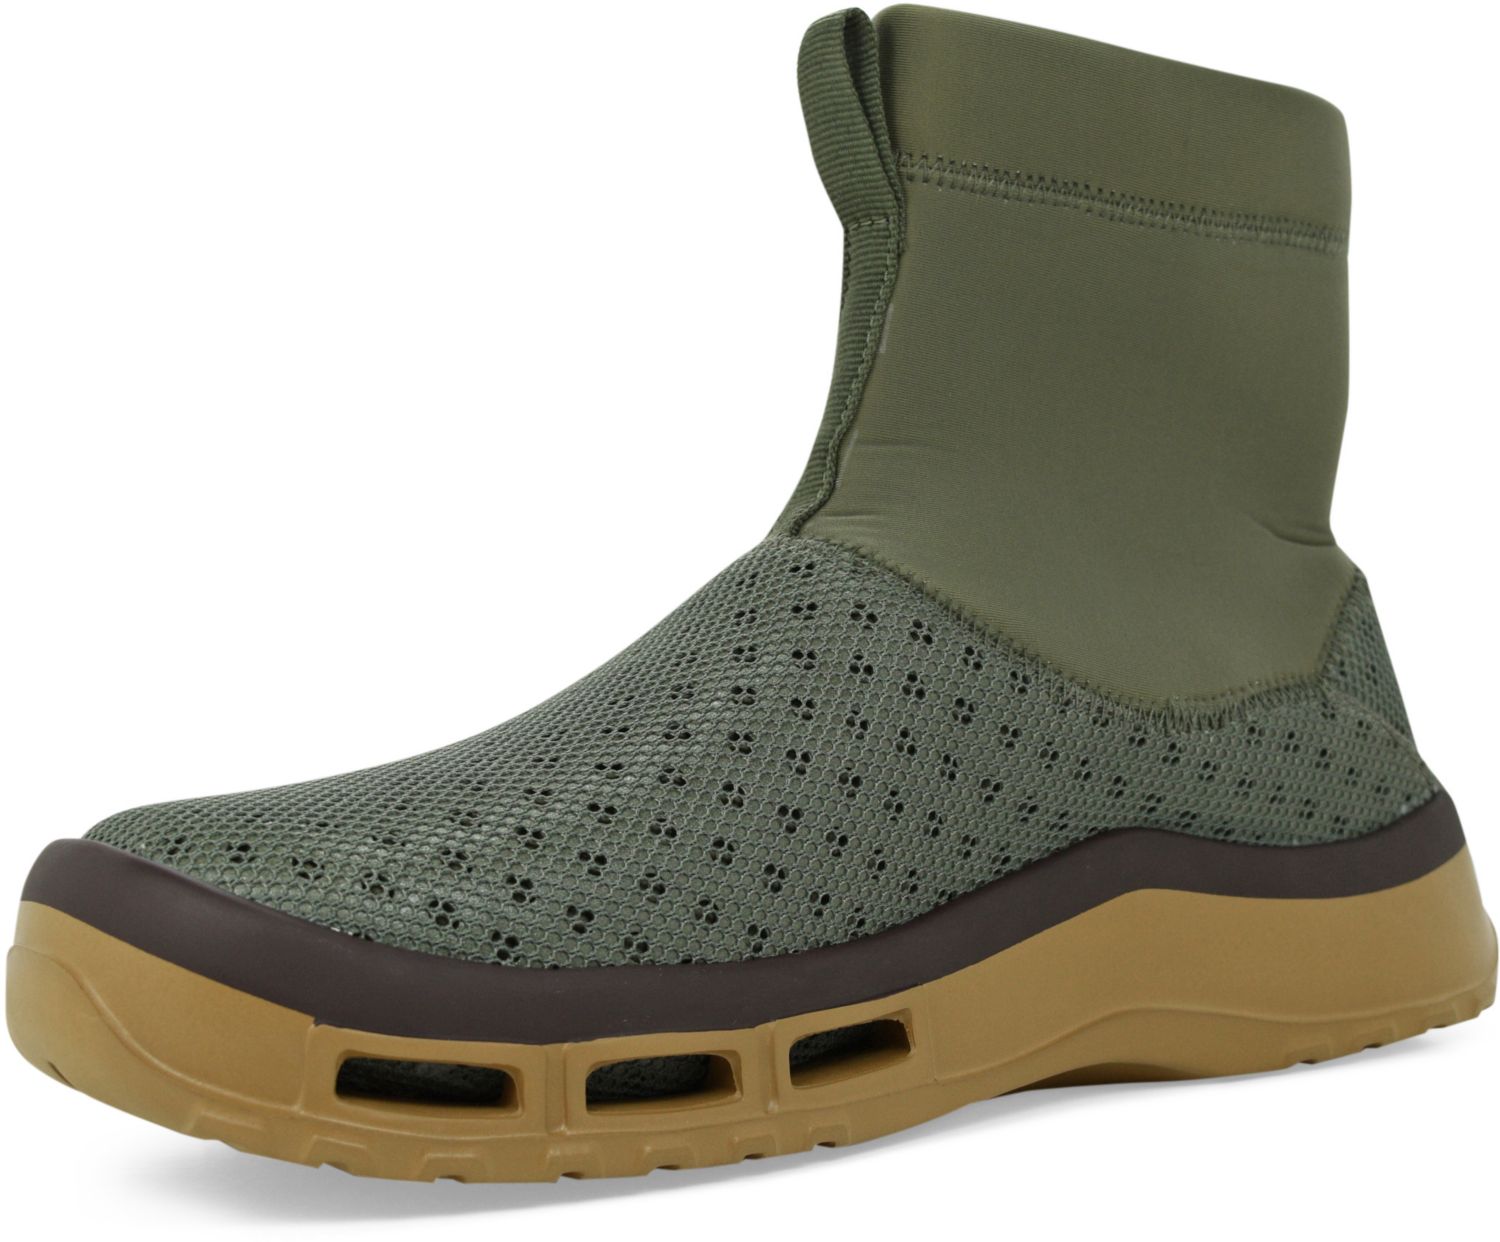 soft science fishing shoes